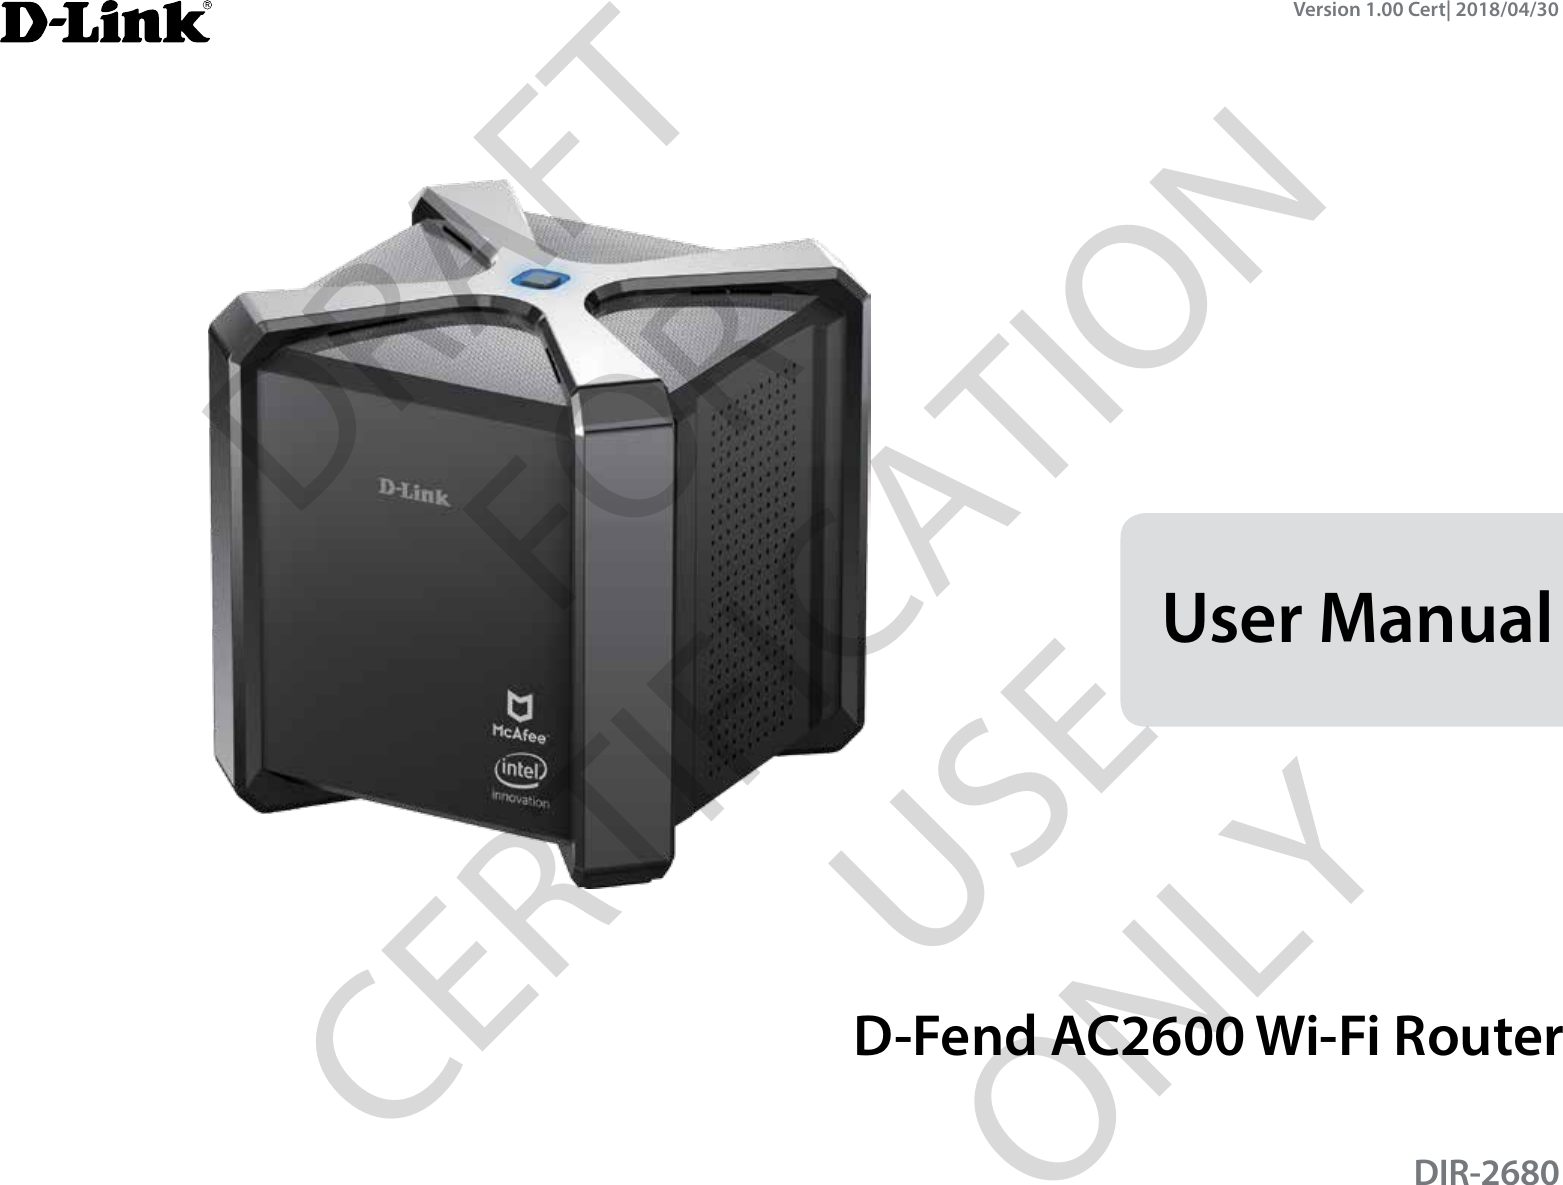 Version 1.00 Cert| 2018/04/30User ManualDIR-2680D-Fend AC2600 Wi-Fi RouterDRAFT FOR CERTIFICATION USE ONLY